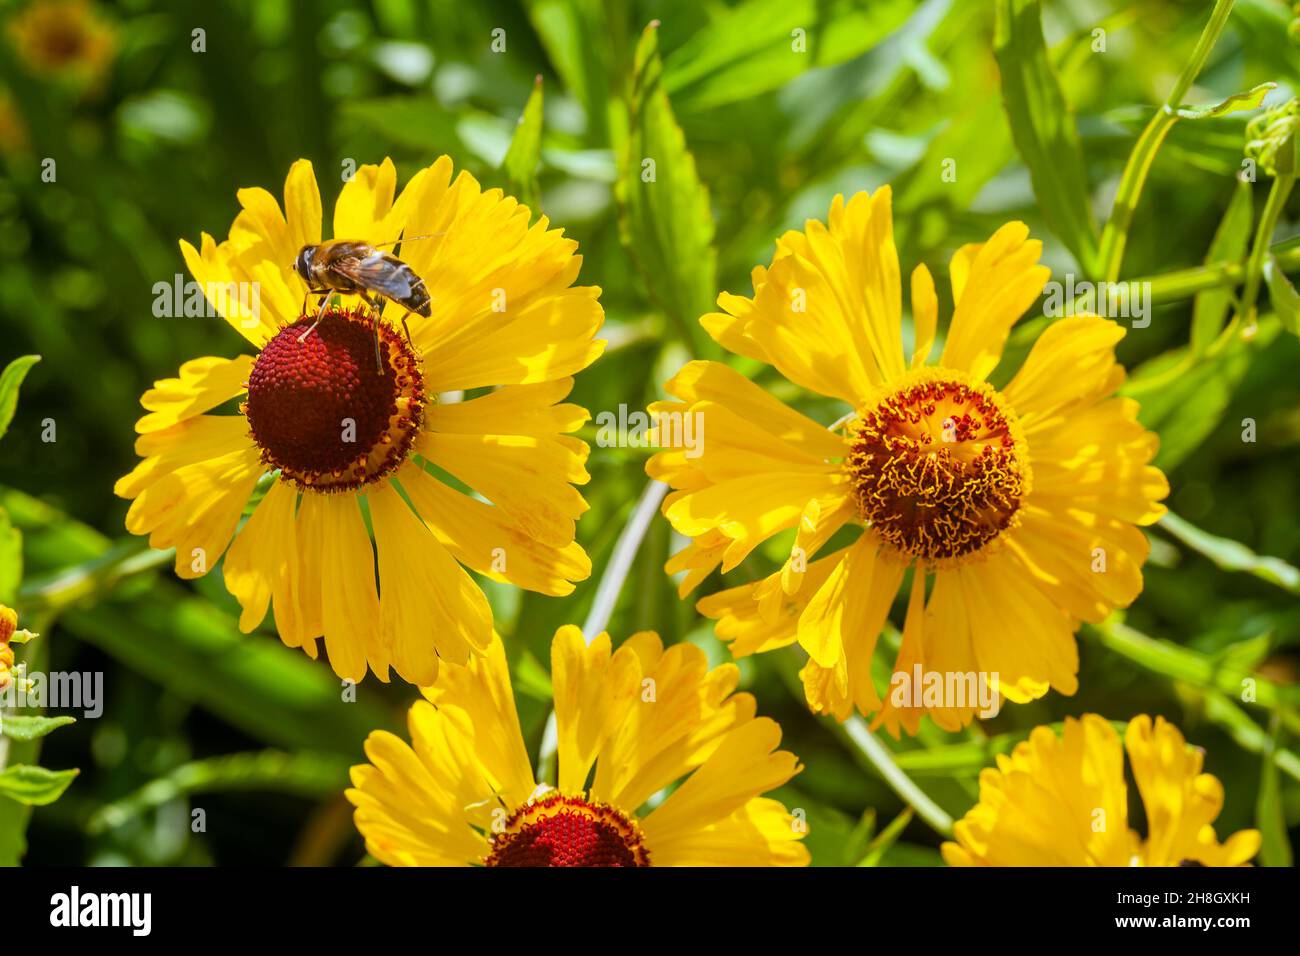 Helenium 'Blutentisch' a late summer autumn flowering plant with a yellow fall flower commonly known as sneezeweed, stock photo image Stock Photo